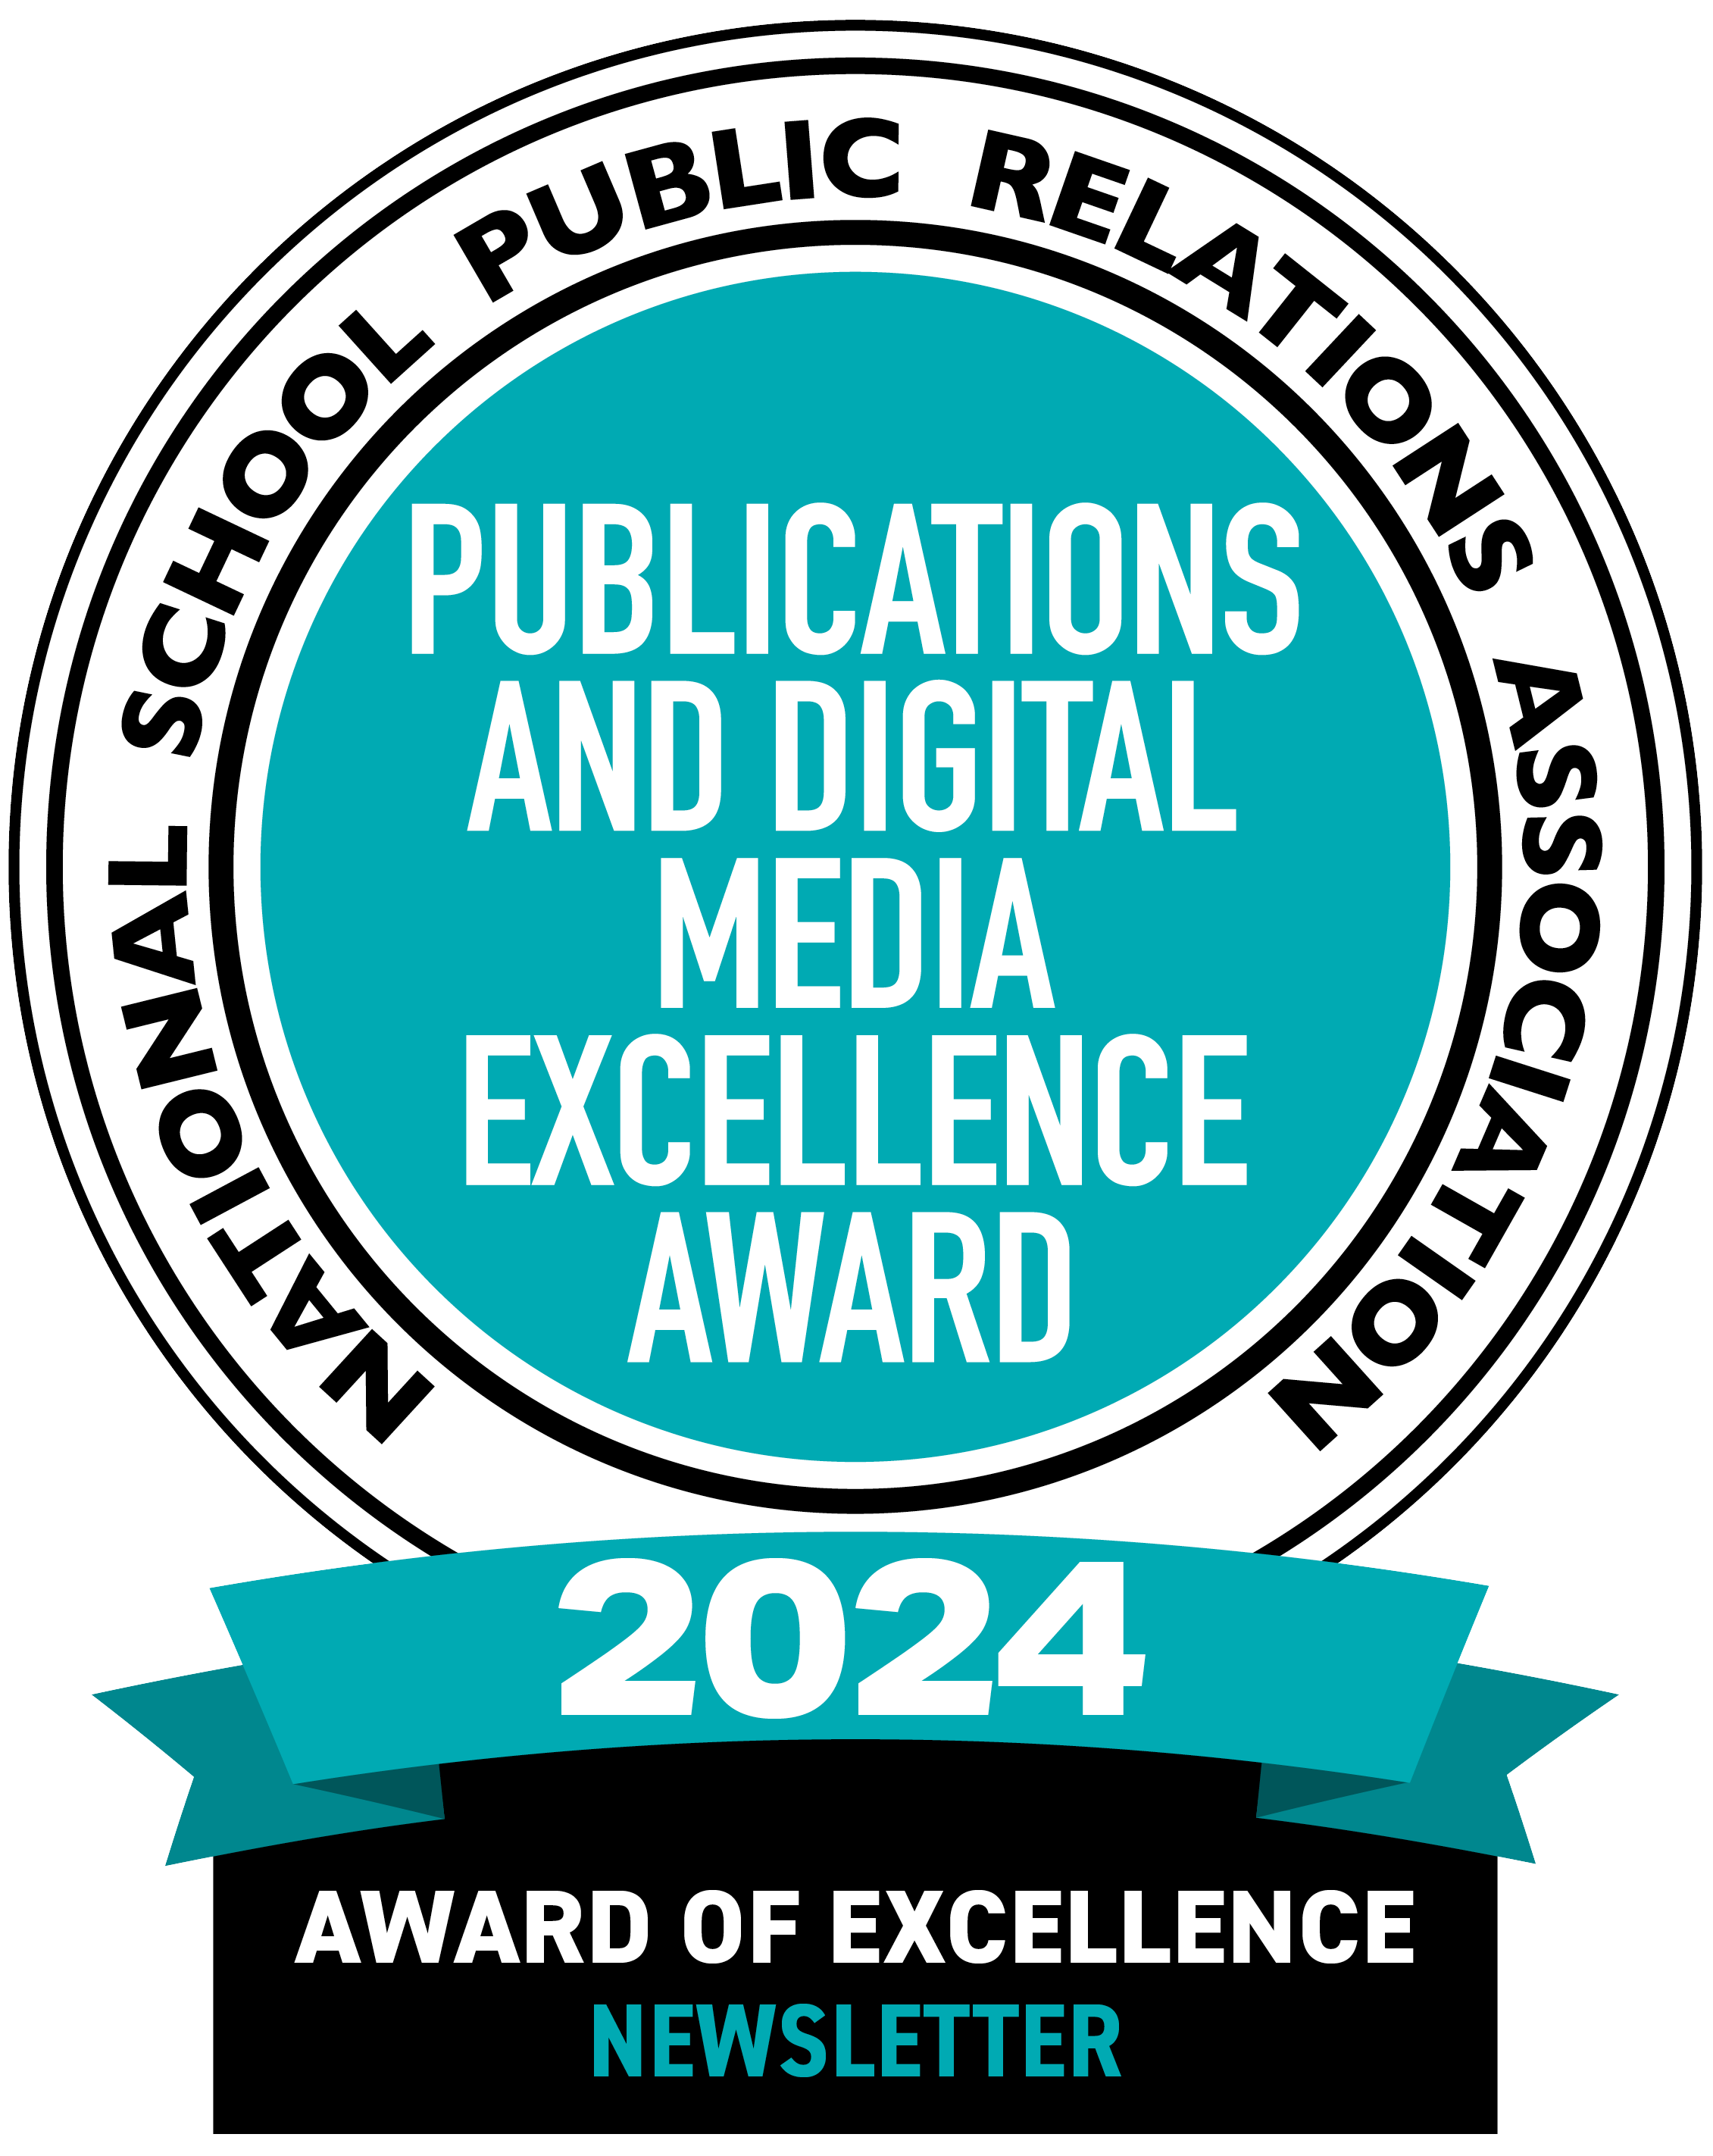 2024 publicand and digital media excellence award for our newsletter